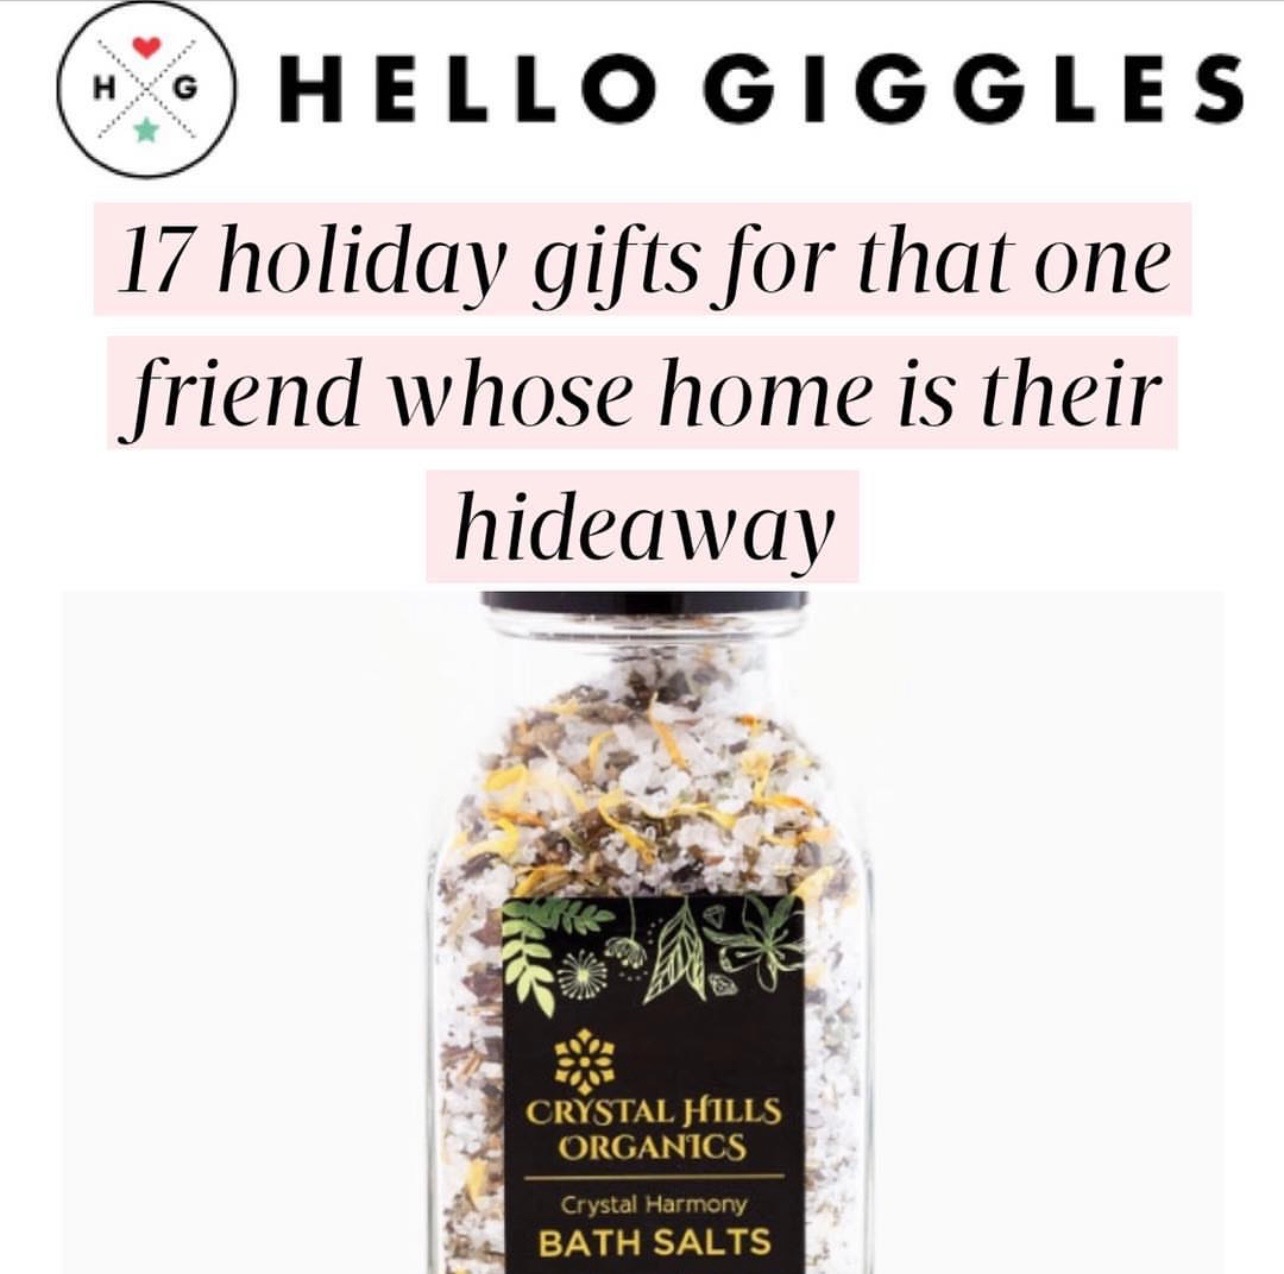 Hello Giggles features Crystal Hills Organics